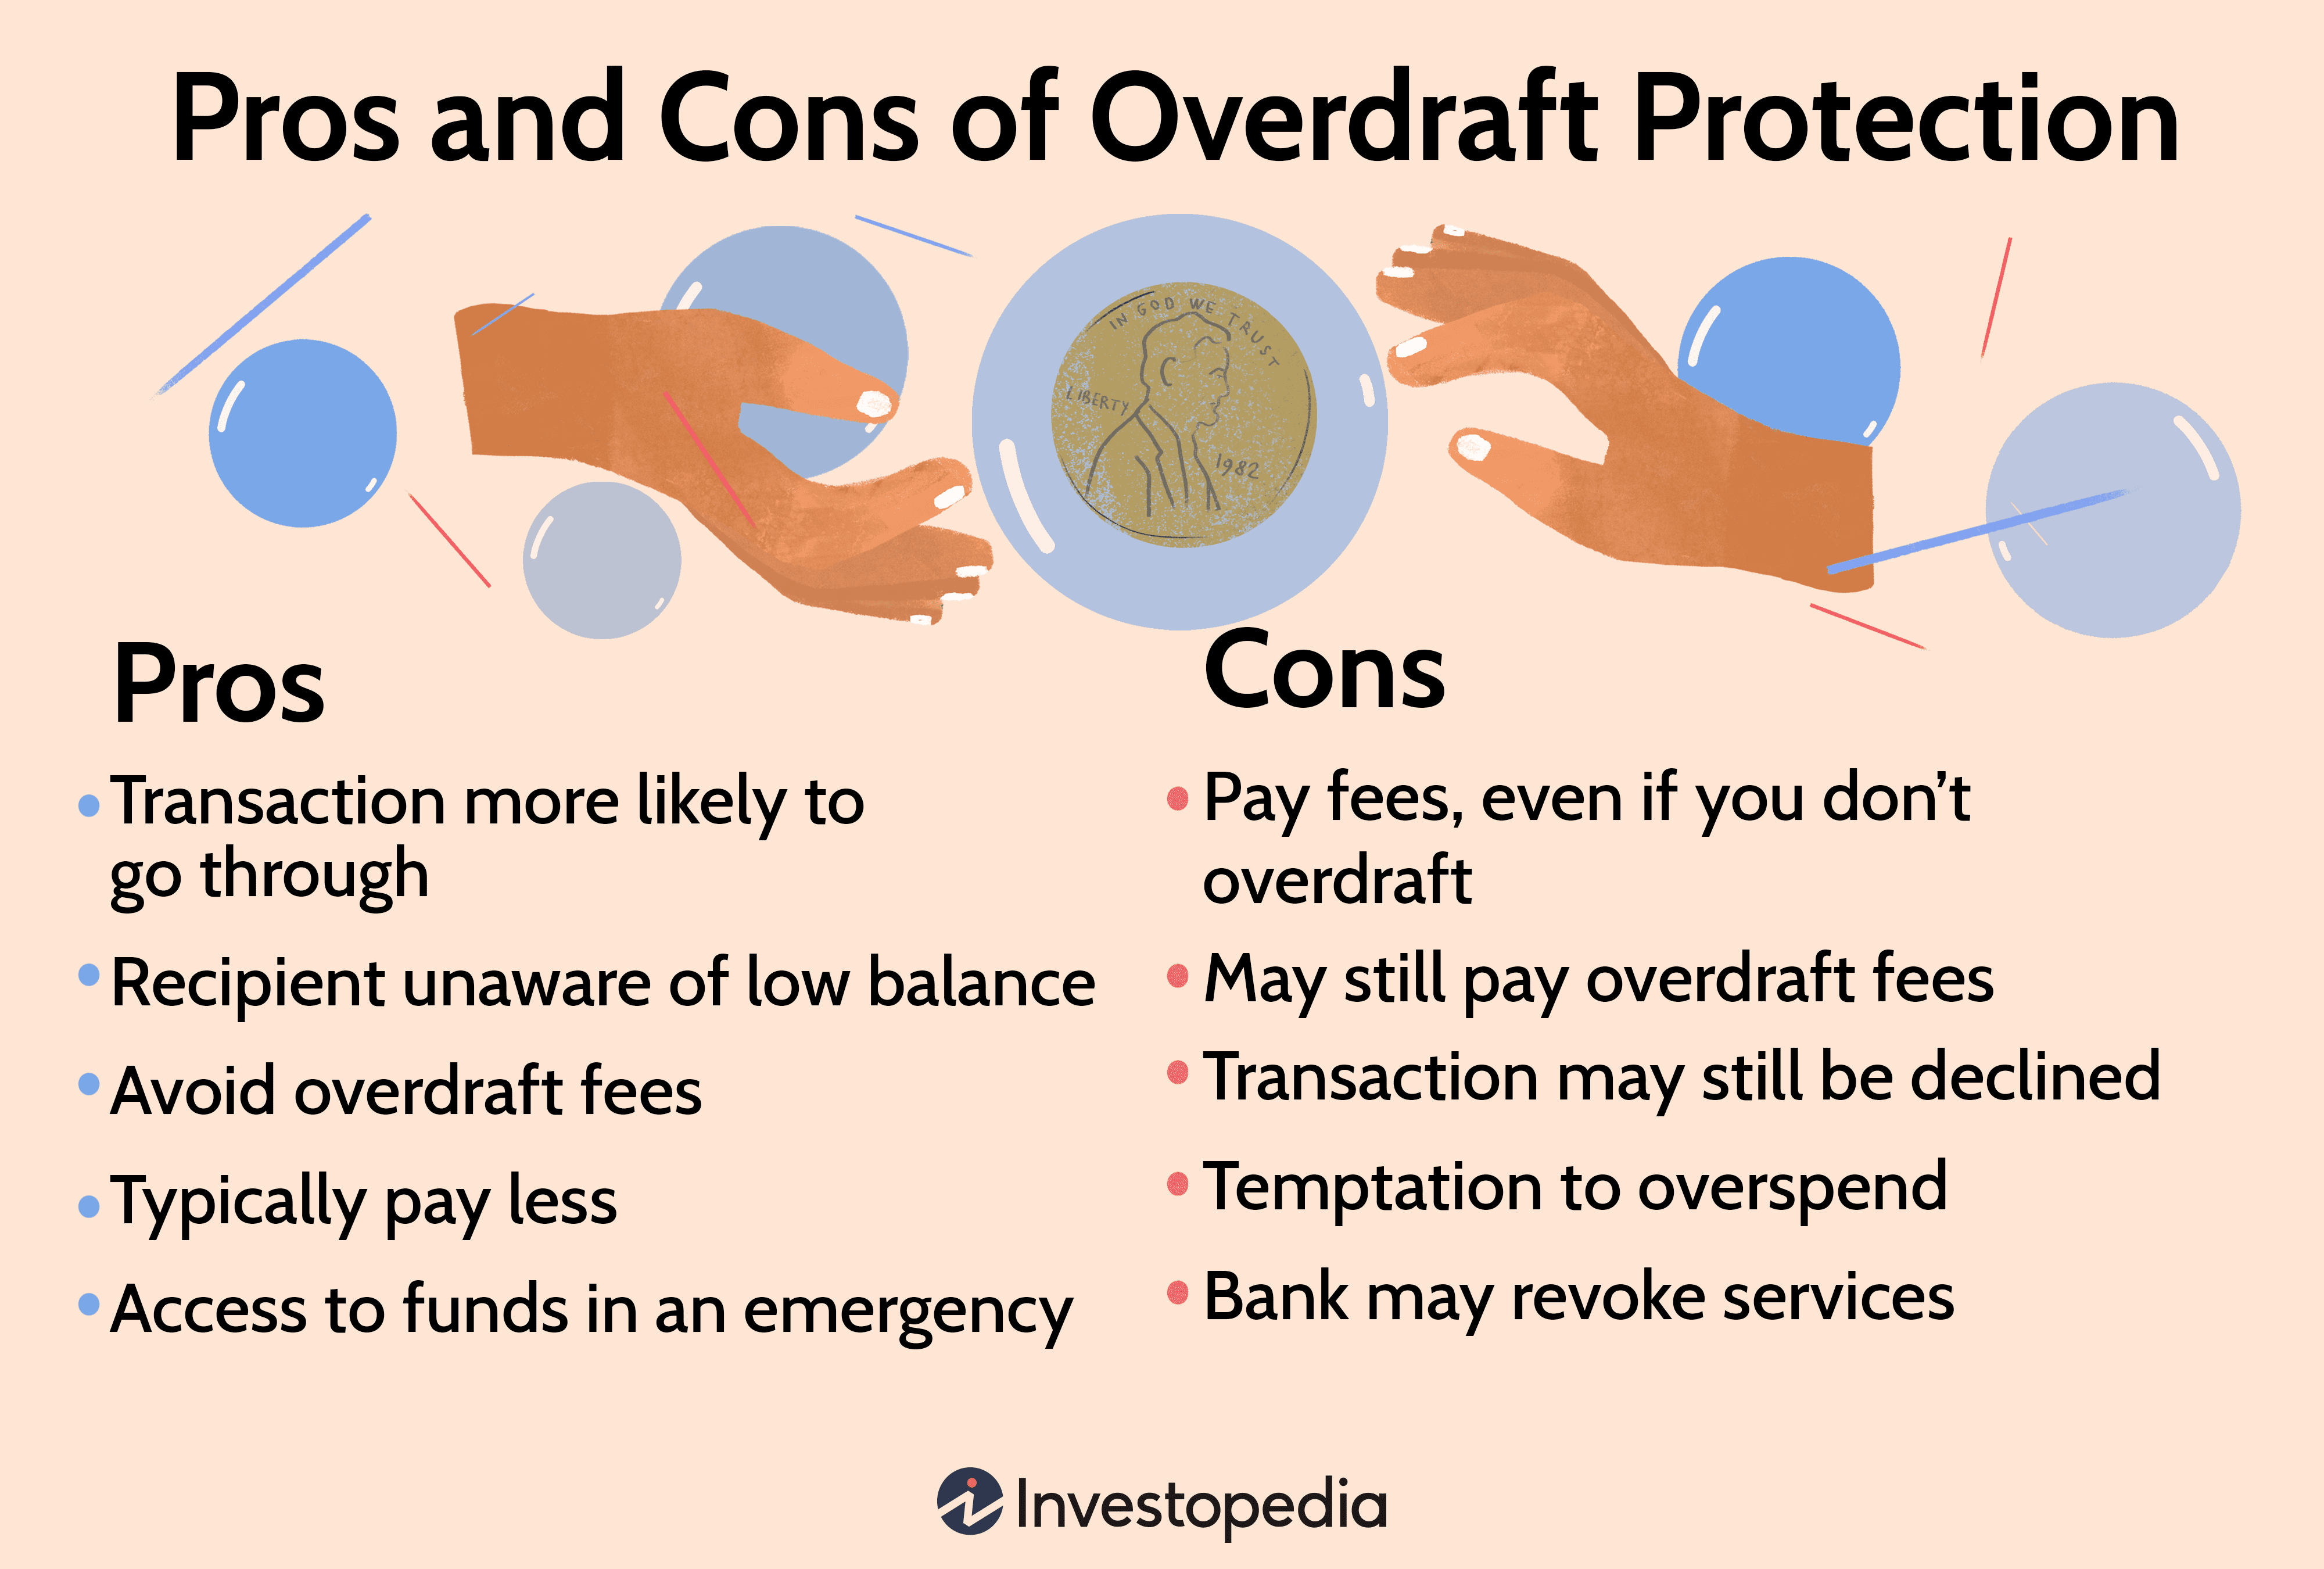 Pros and Cons of Overdraft Protection